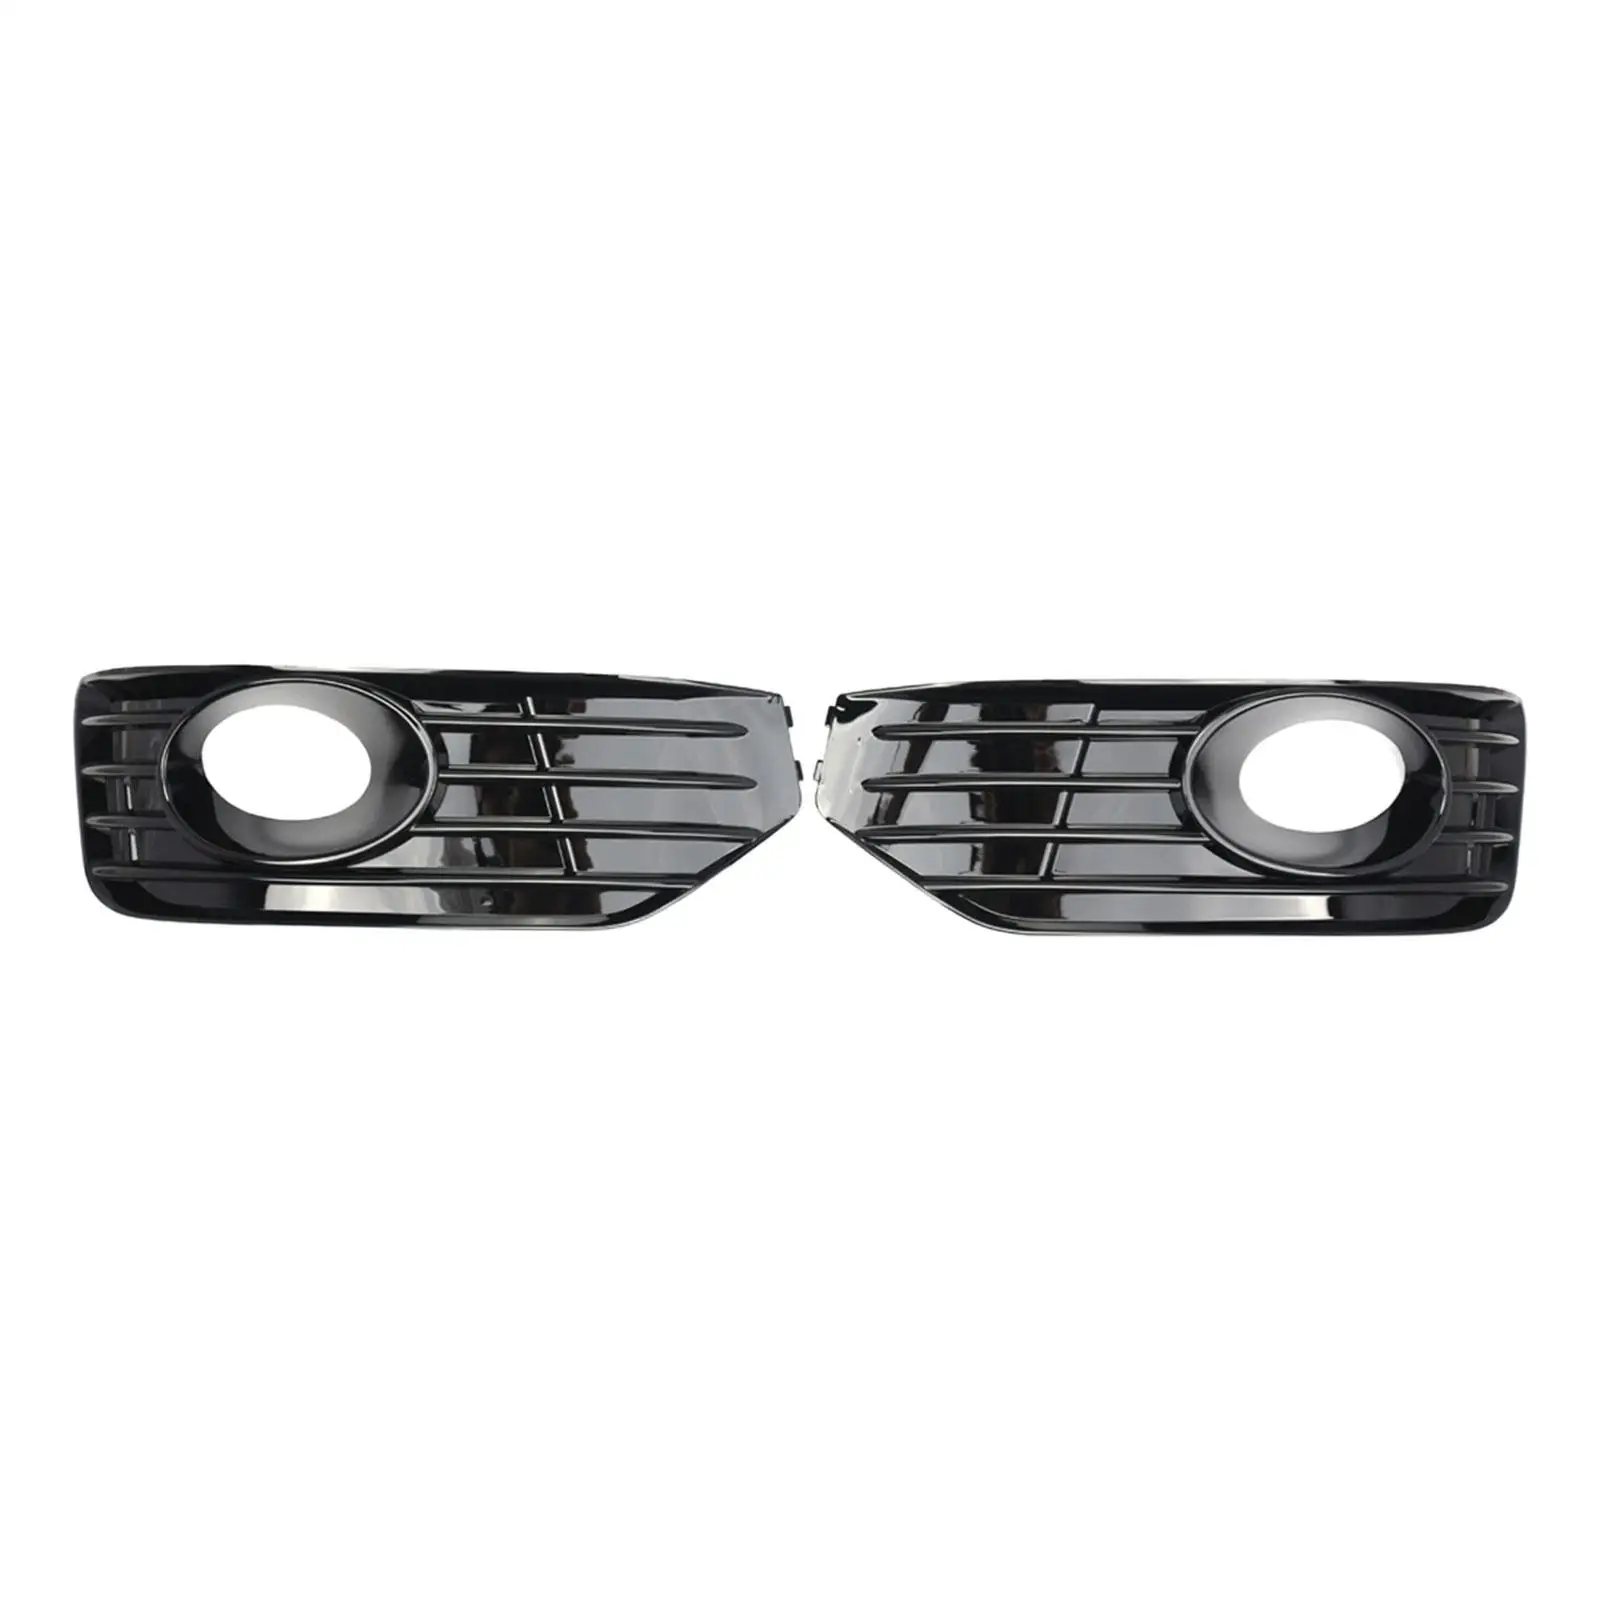 2 Pieces Fog Light Grilles Fog Lamps Grille Left and Right Side for T5.1